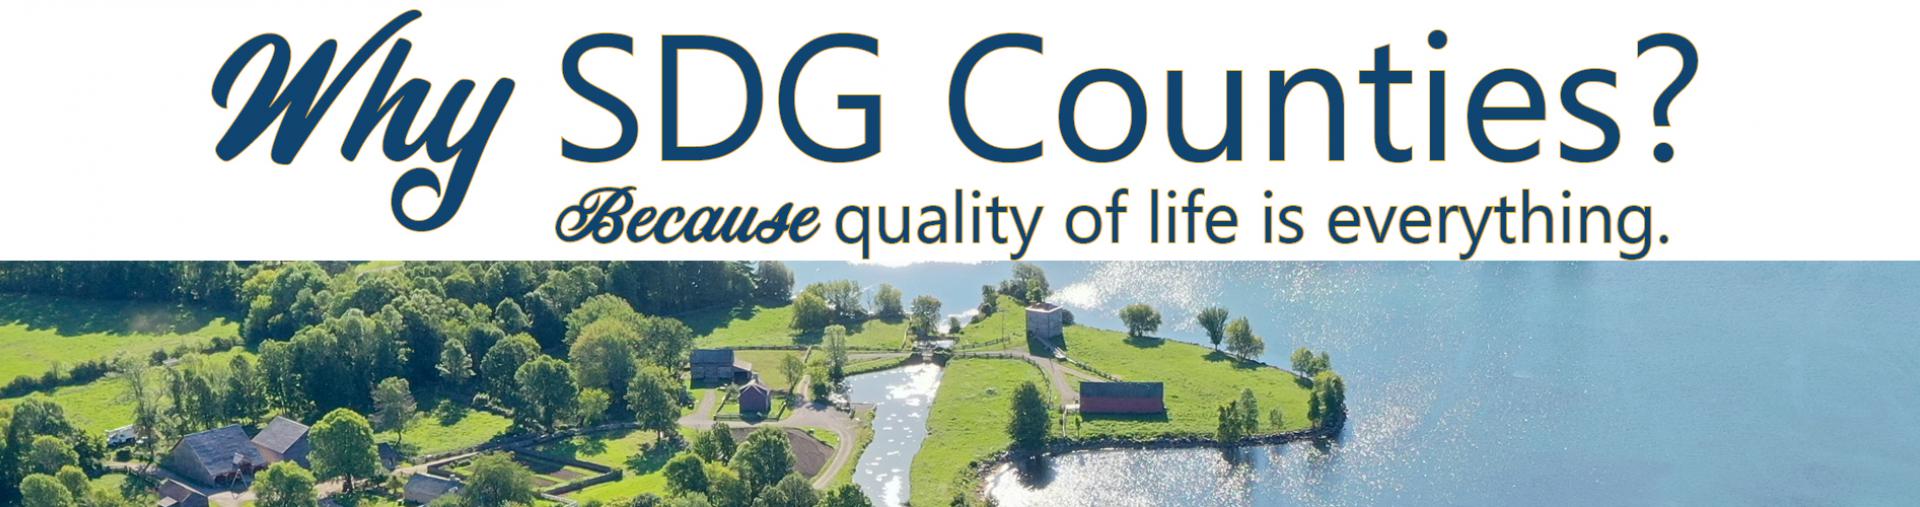 Why SDG Counties? Because quality of life is everything.